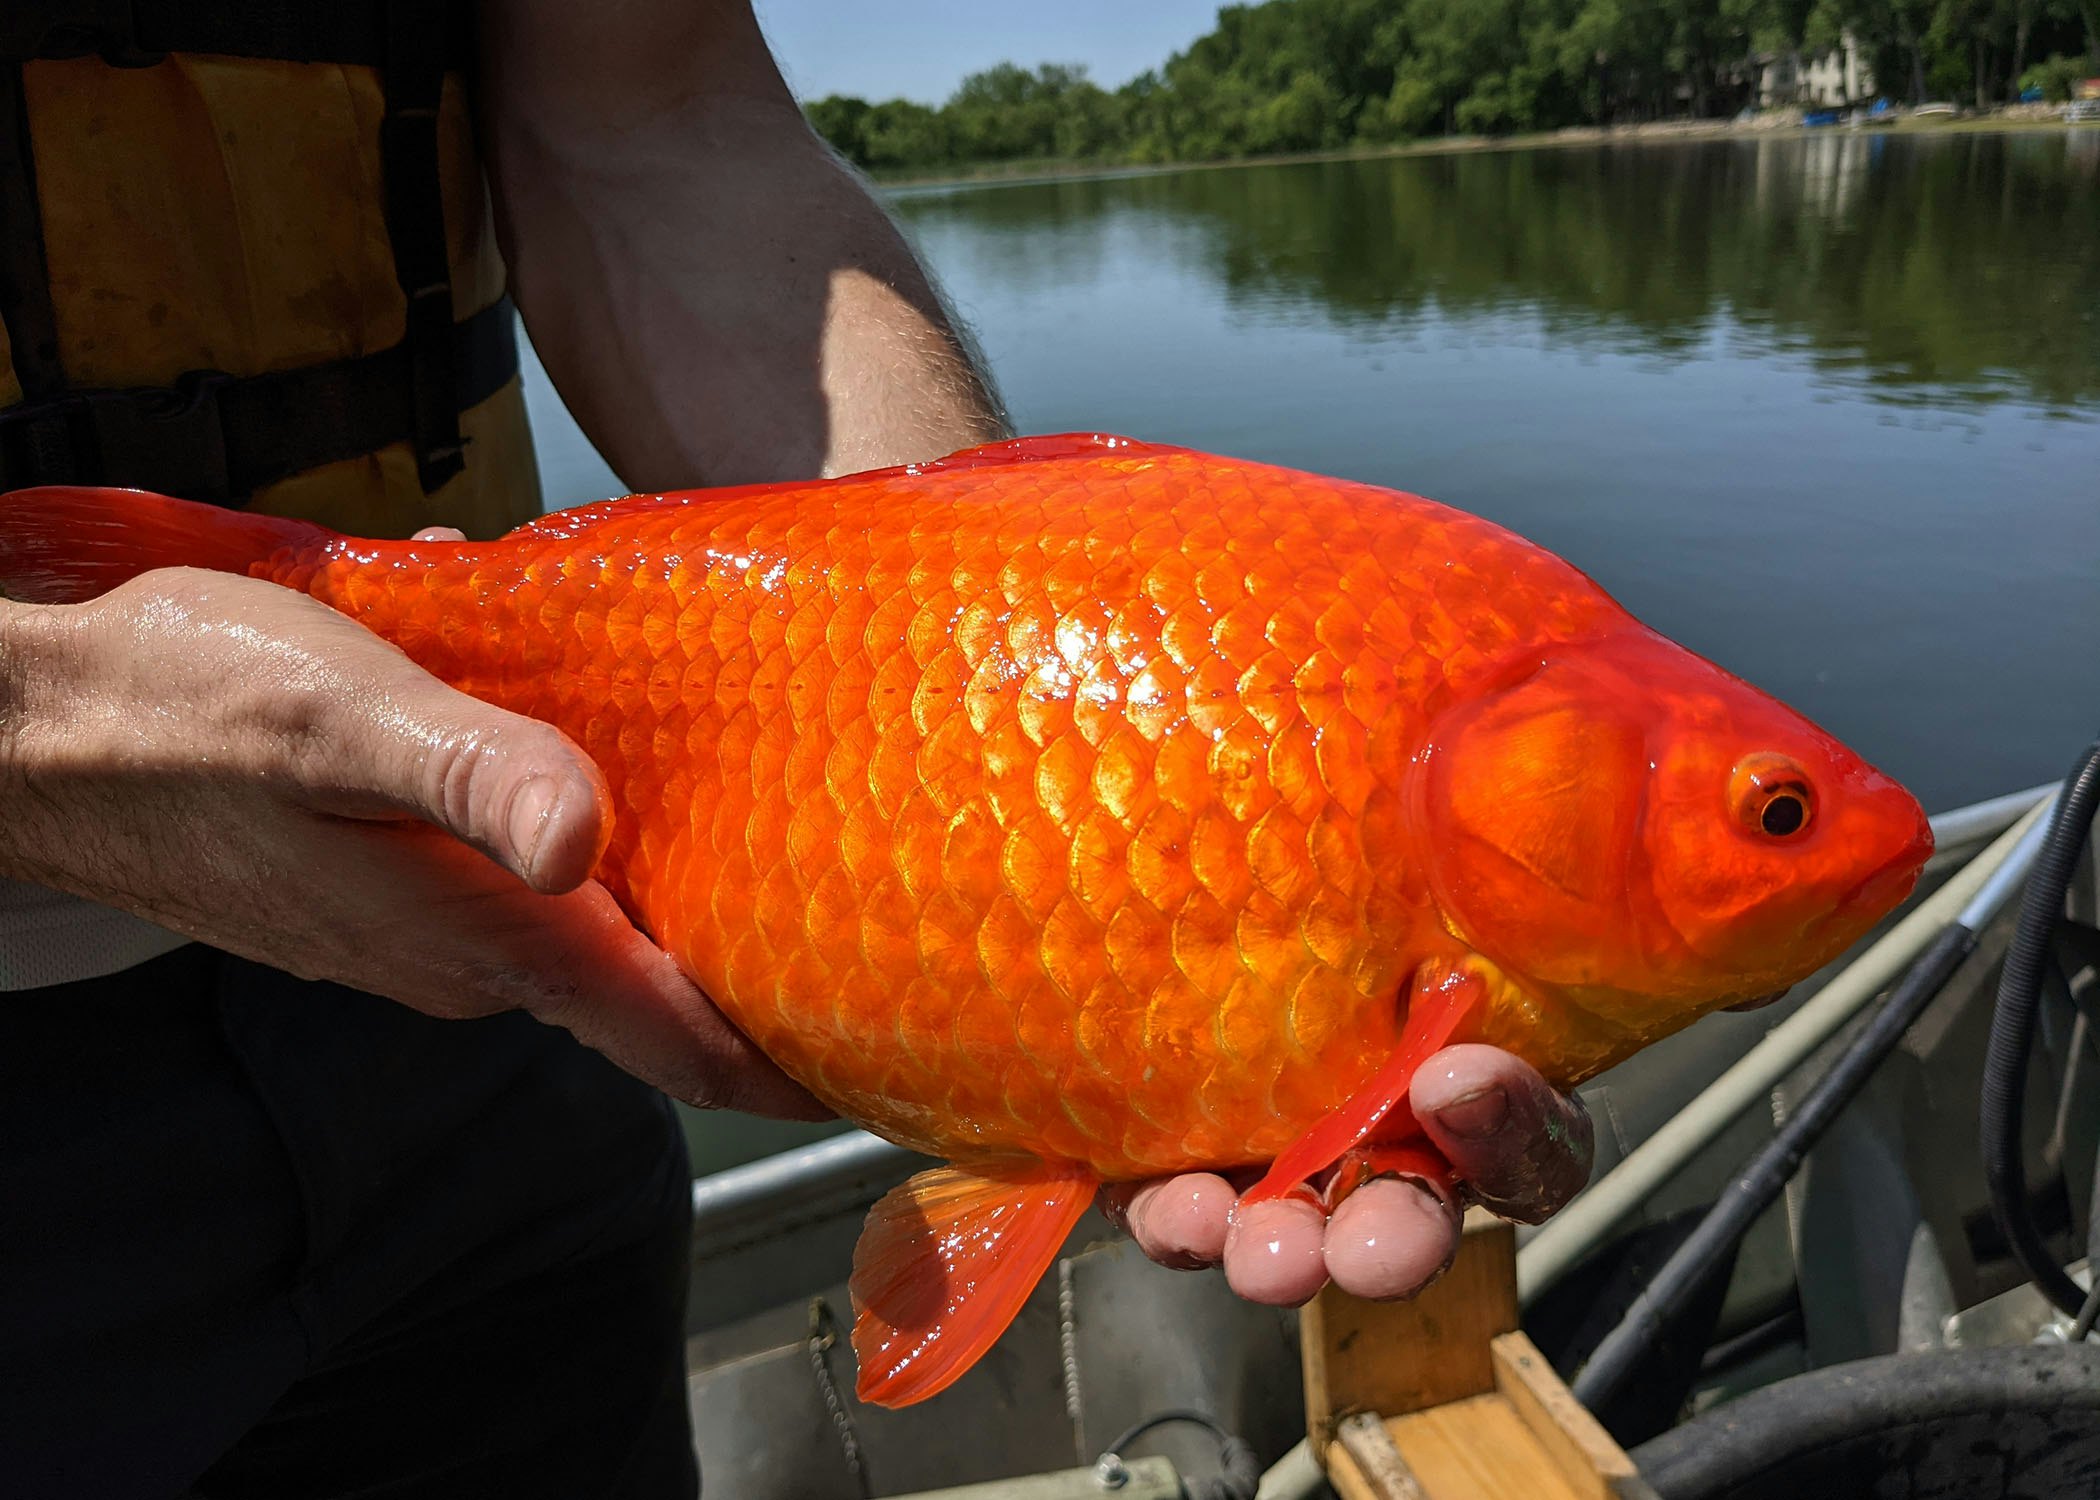 Fact-checking the Minnesota goldfish mystery: Scientists explain